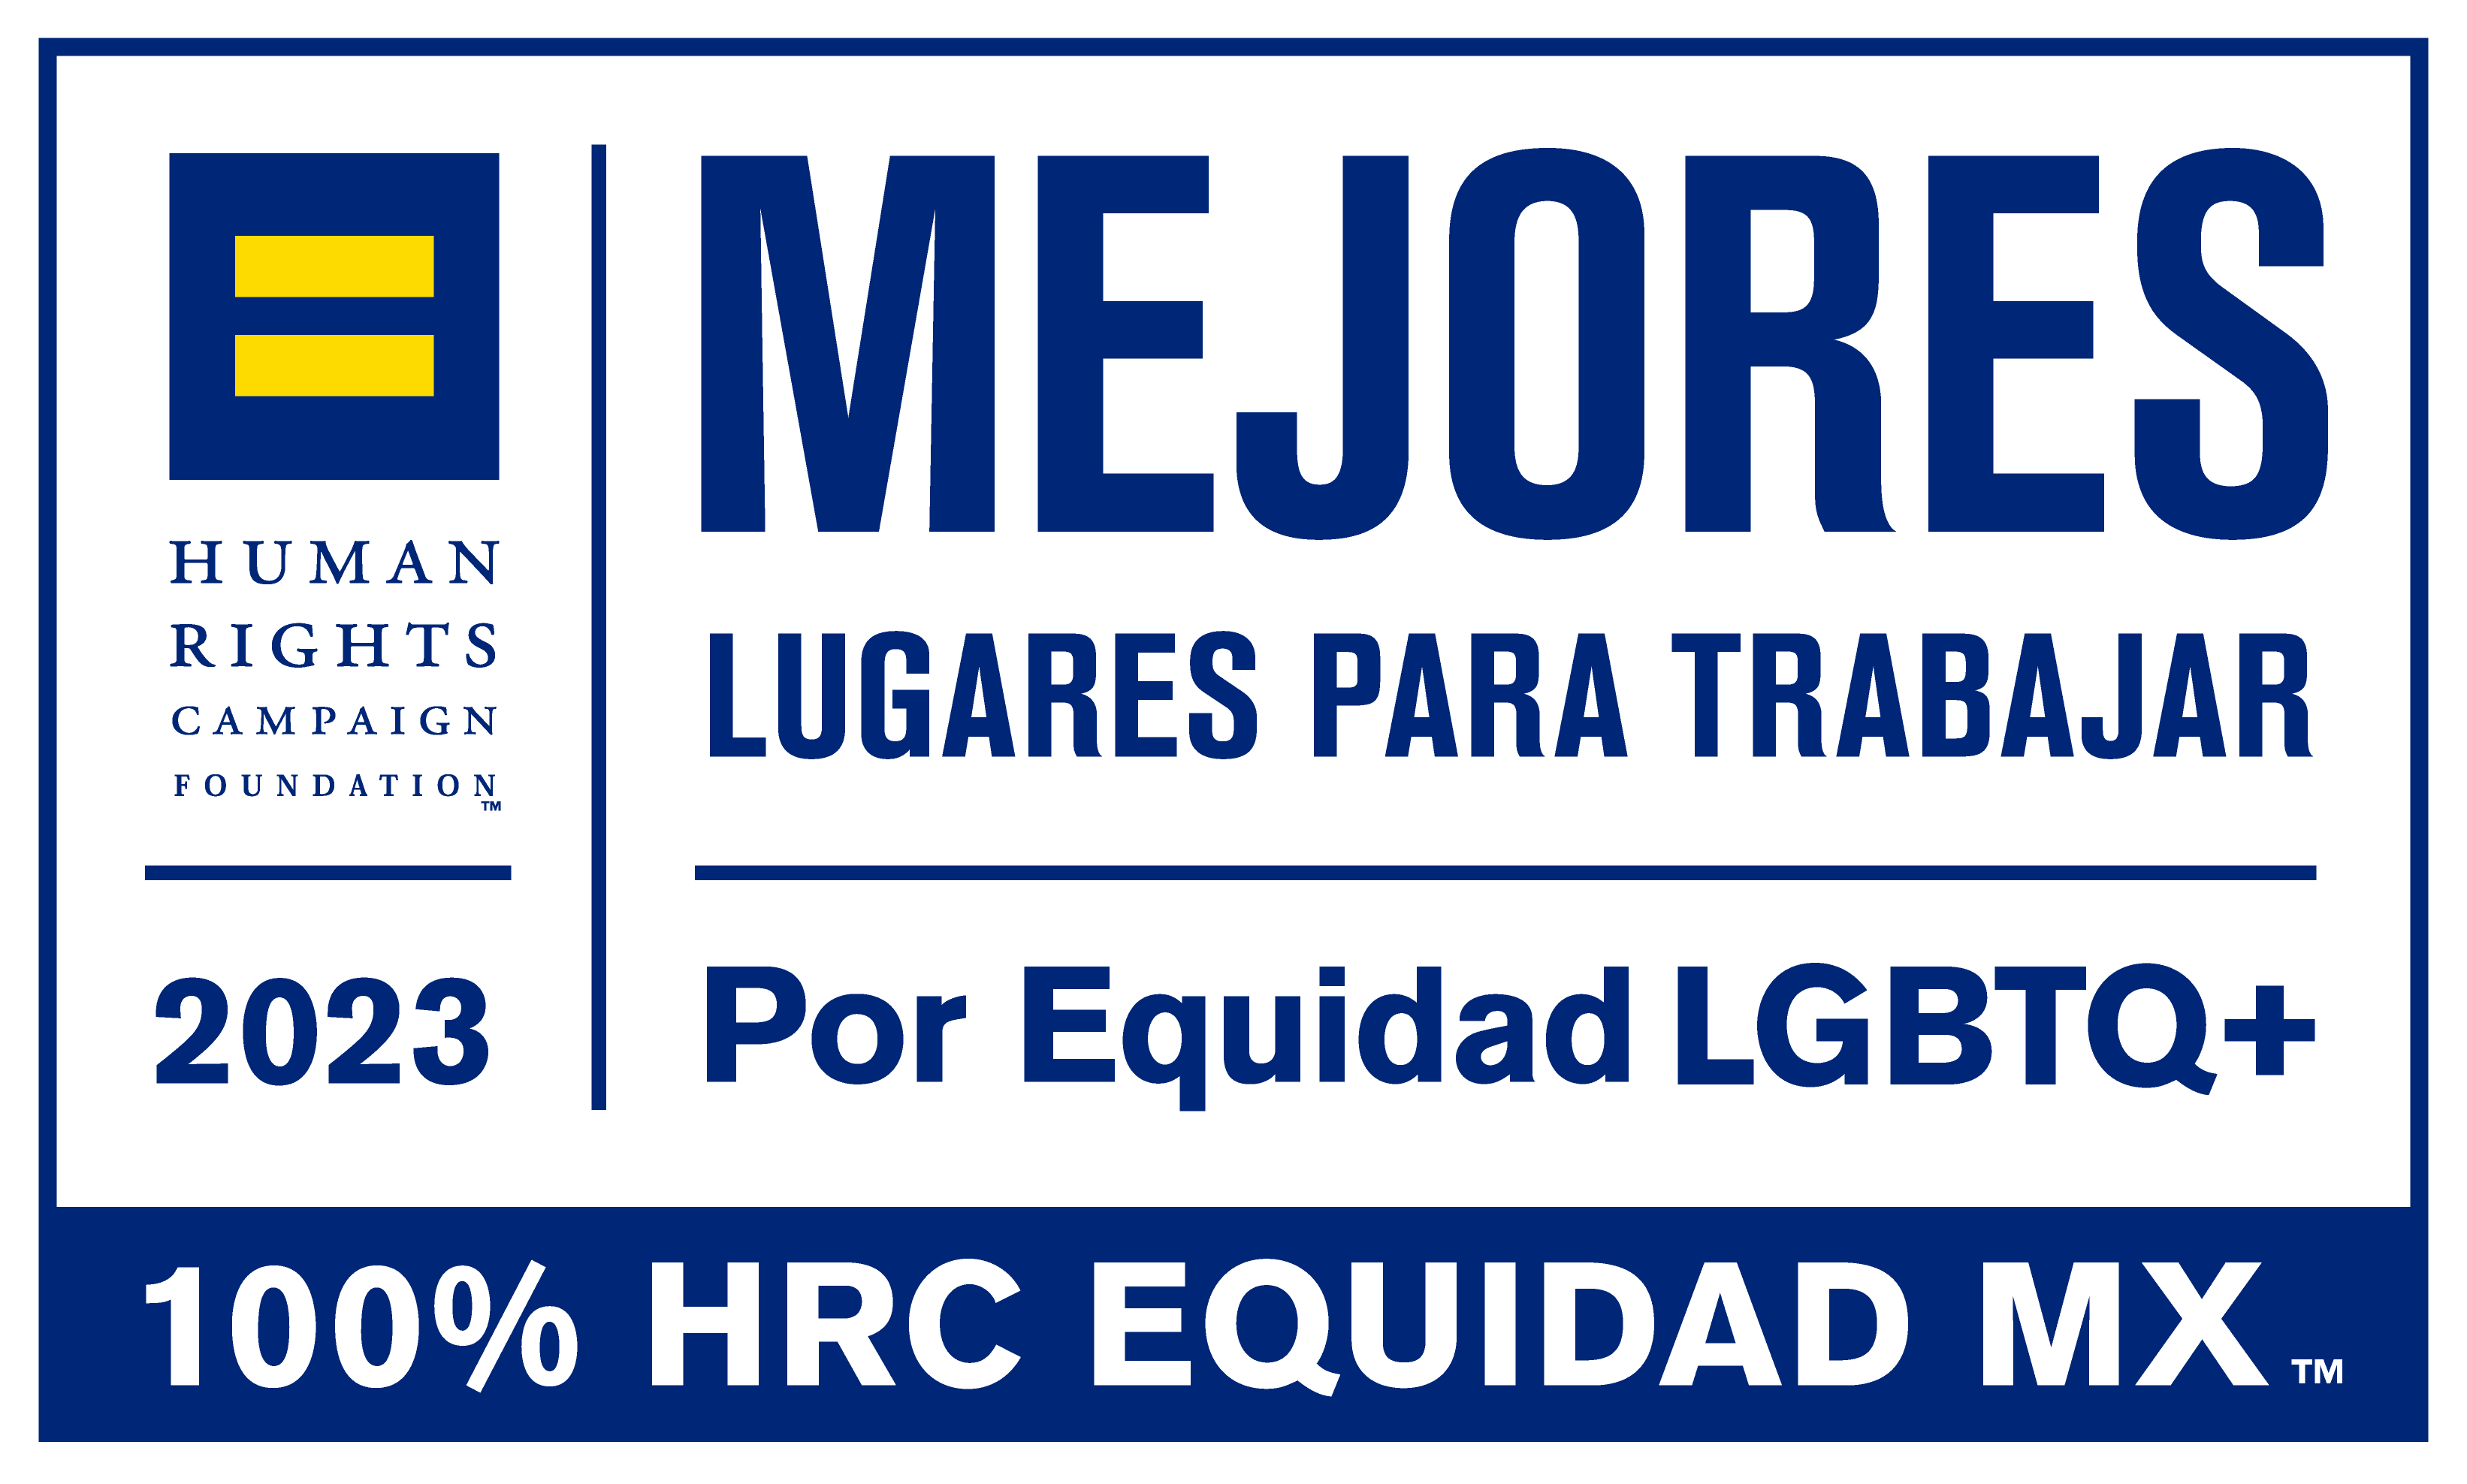 Equidad MX 2020 and 2021